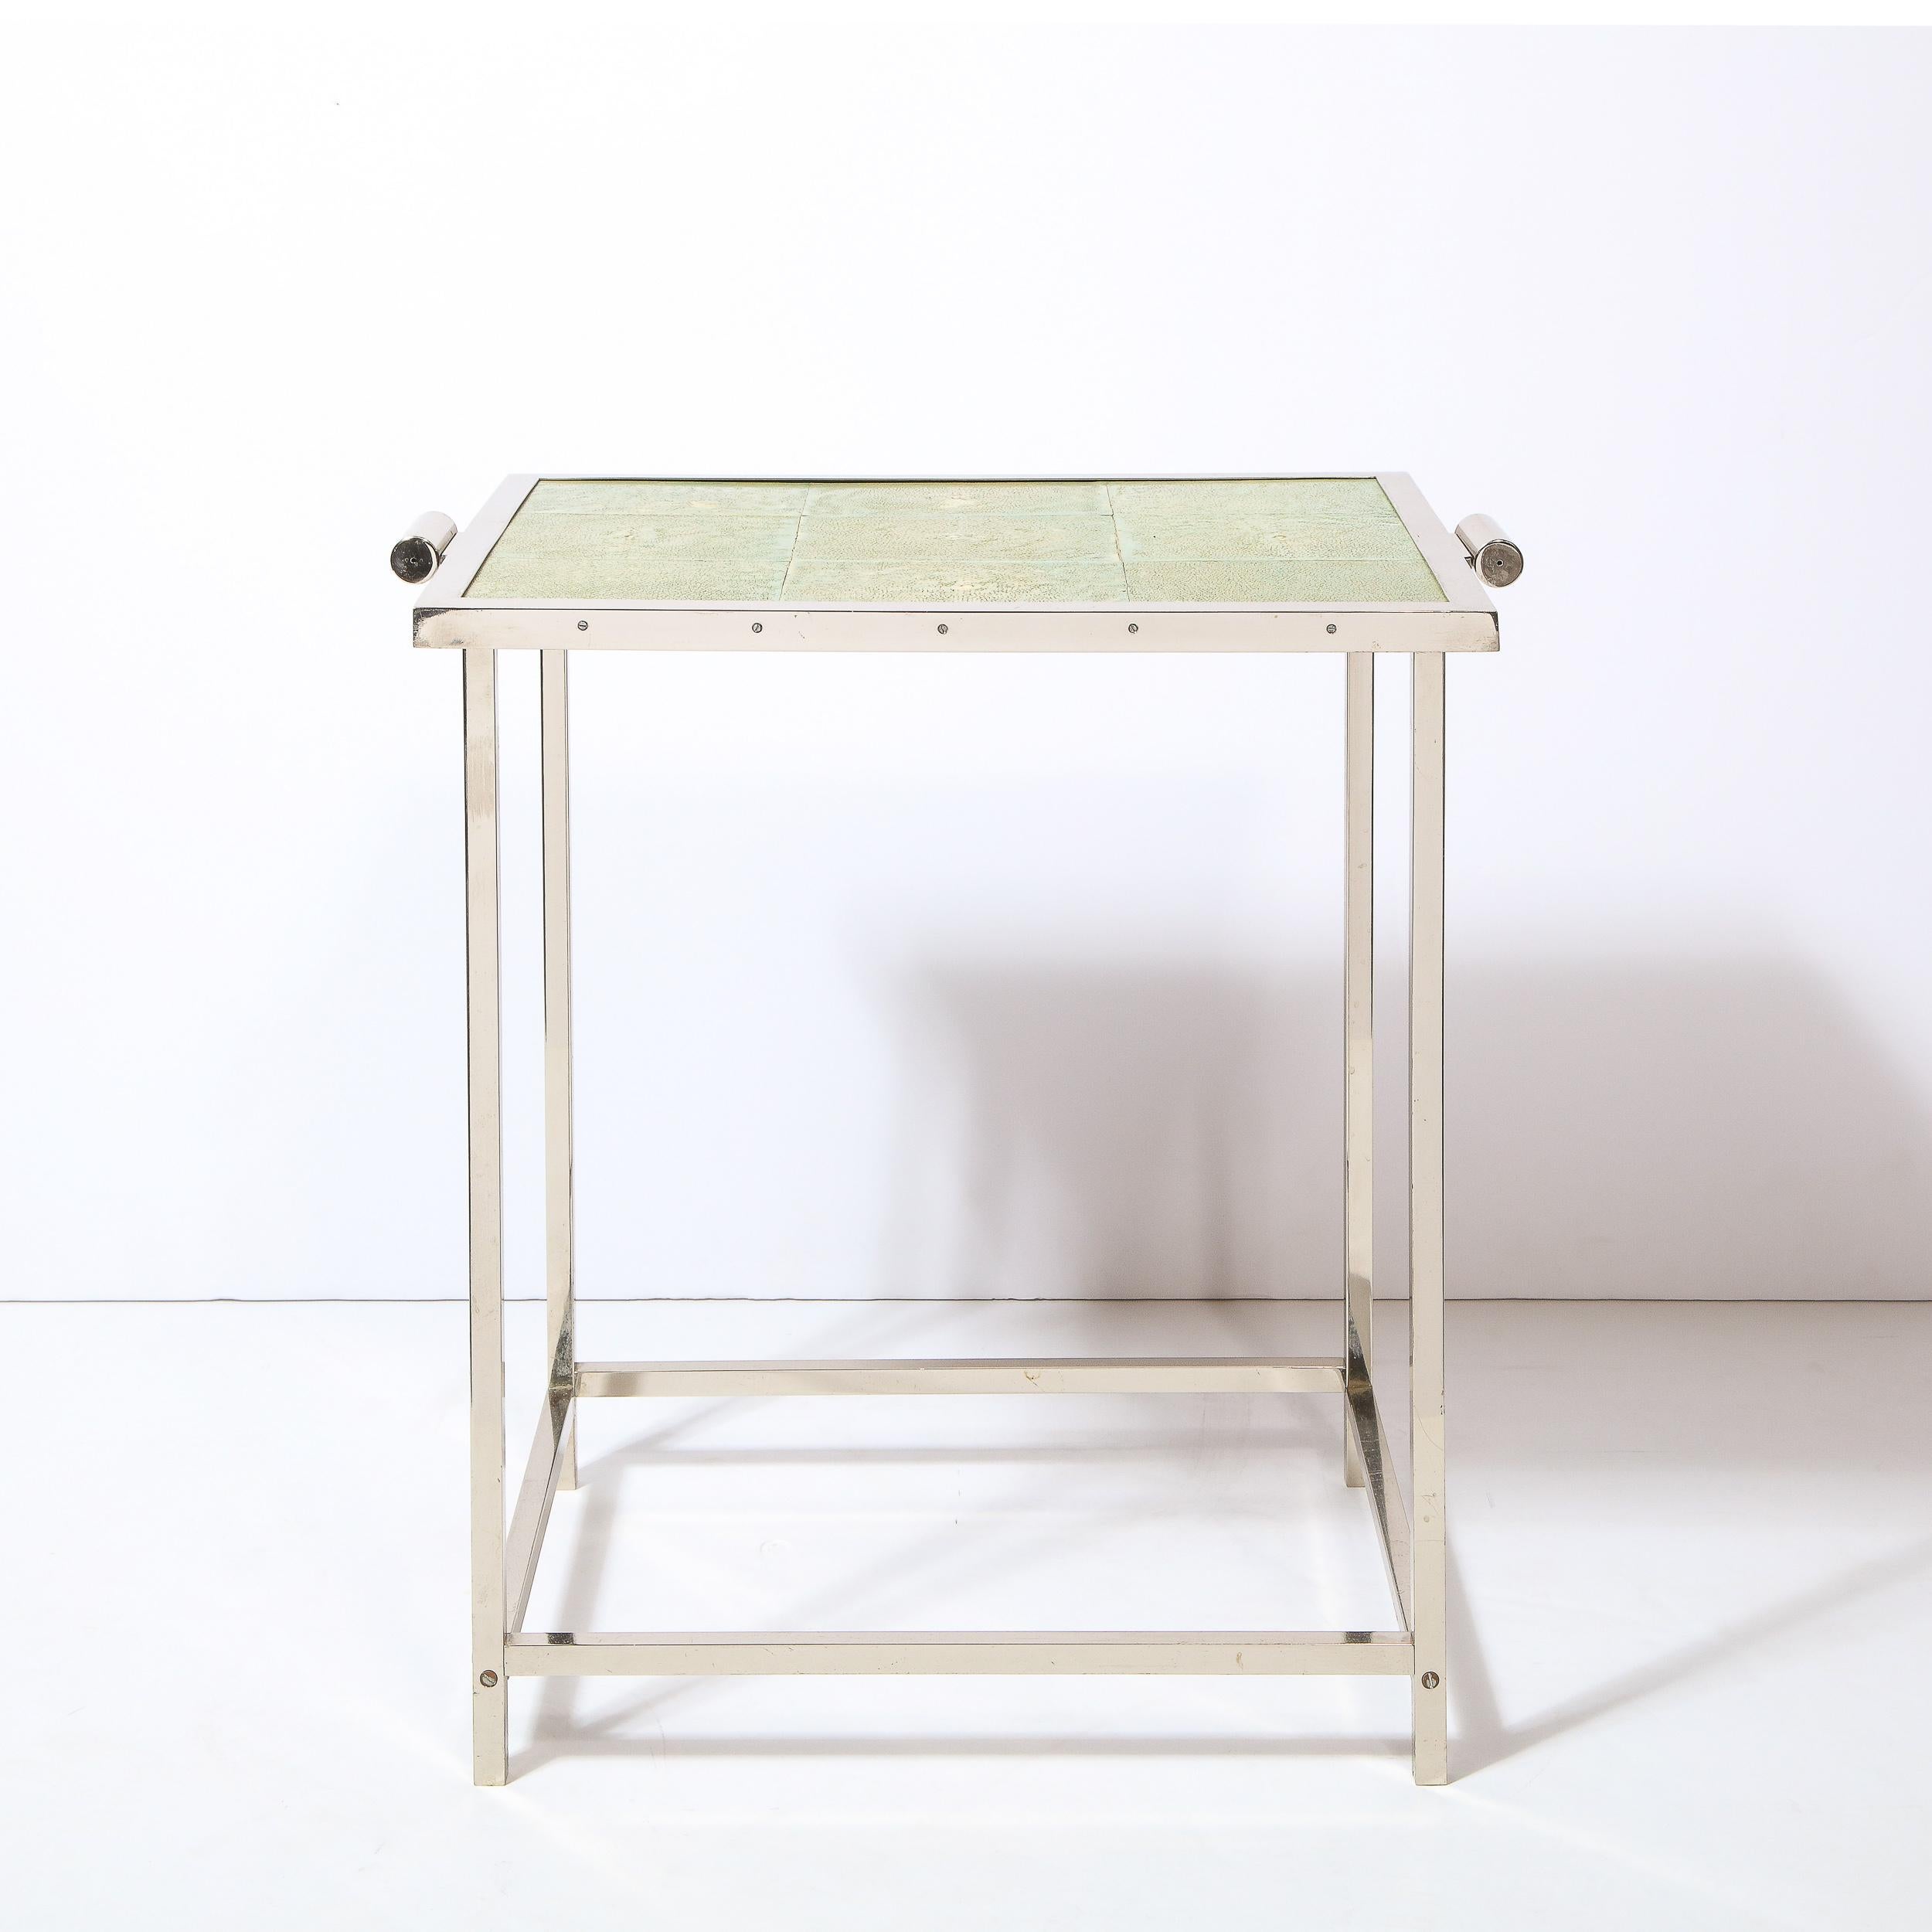 This stunning modernist Art Deco revival table was realized in the United States circa 1980. It features a rectilinear aluminum base with streamlined embellishments on two of the sides and a tessellated shagreen top in a sophisticated jade hue. With